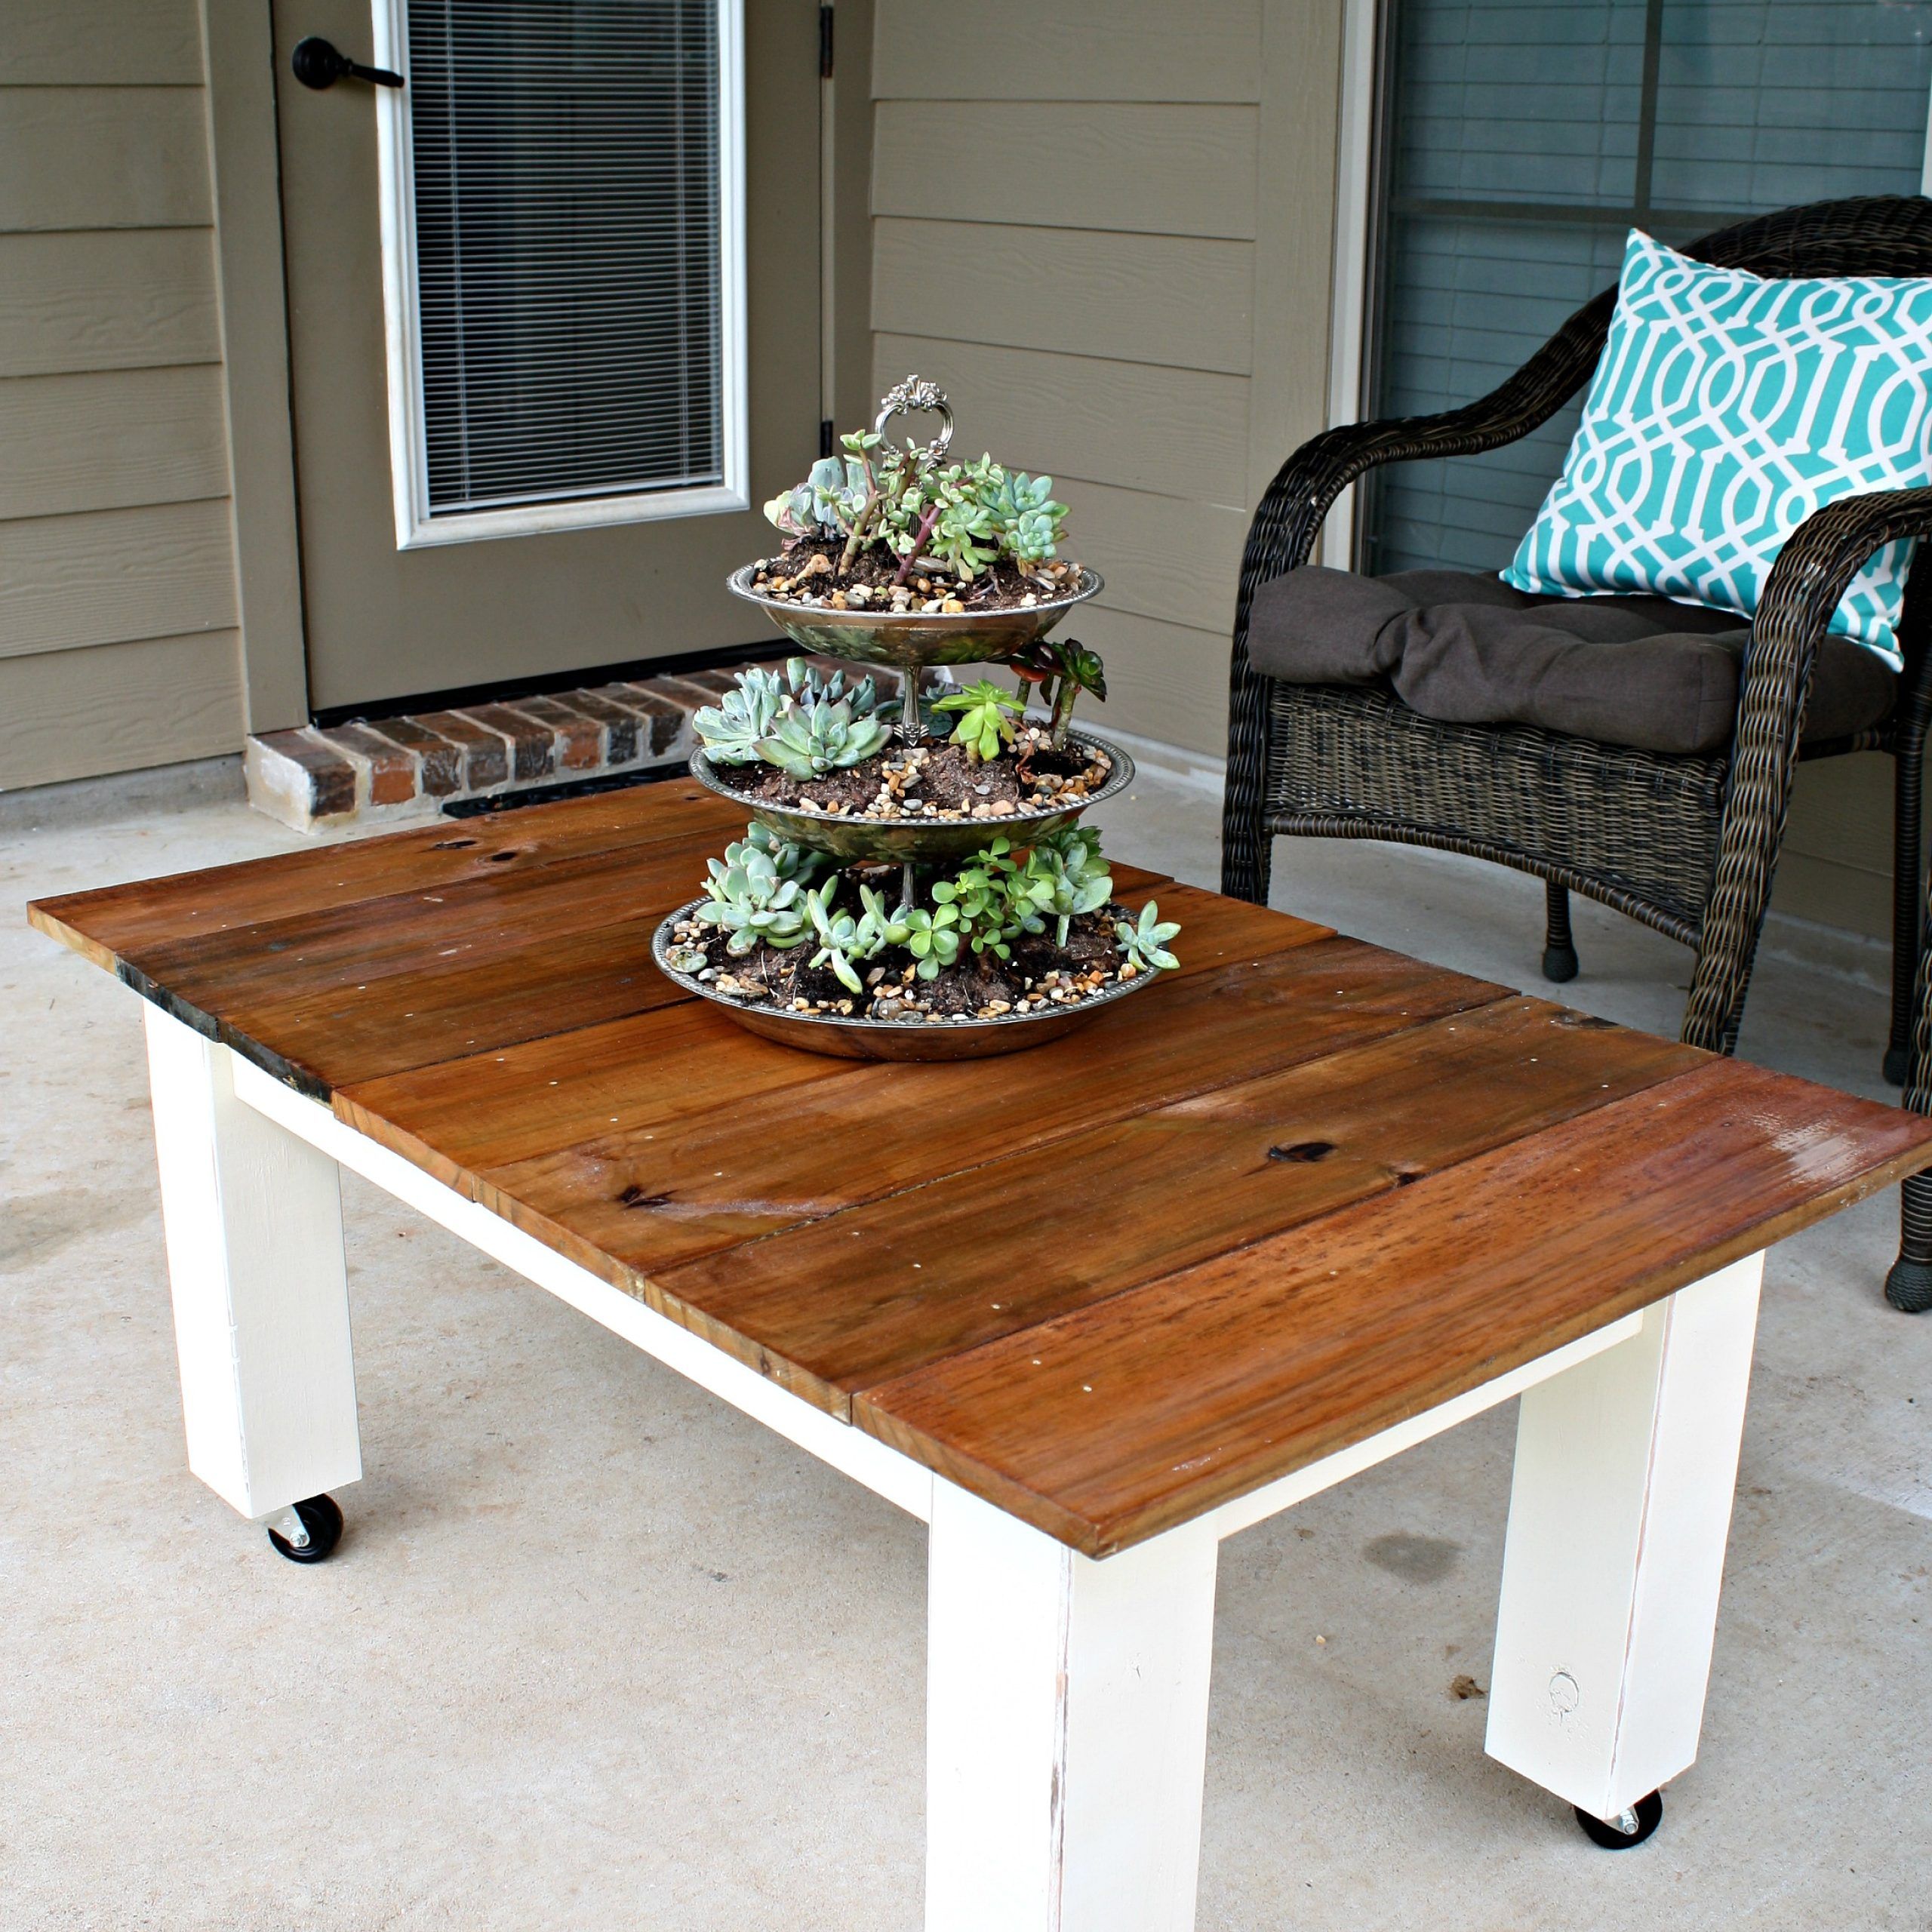 Diy Outdoor Coffee Table – A Diamond In The Stuff With Regard To Outdoor Half Round Coffee Tables (Gallery 11 of 20)